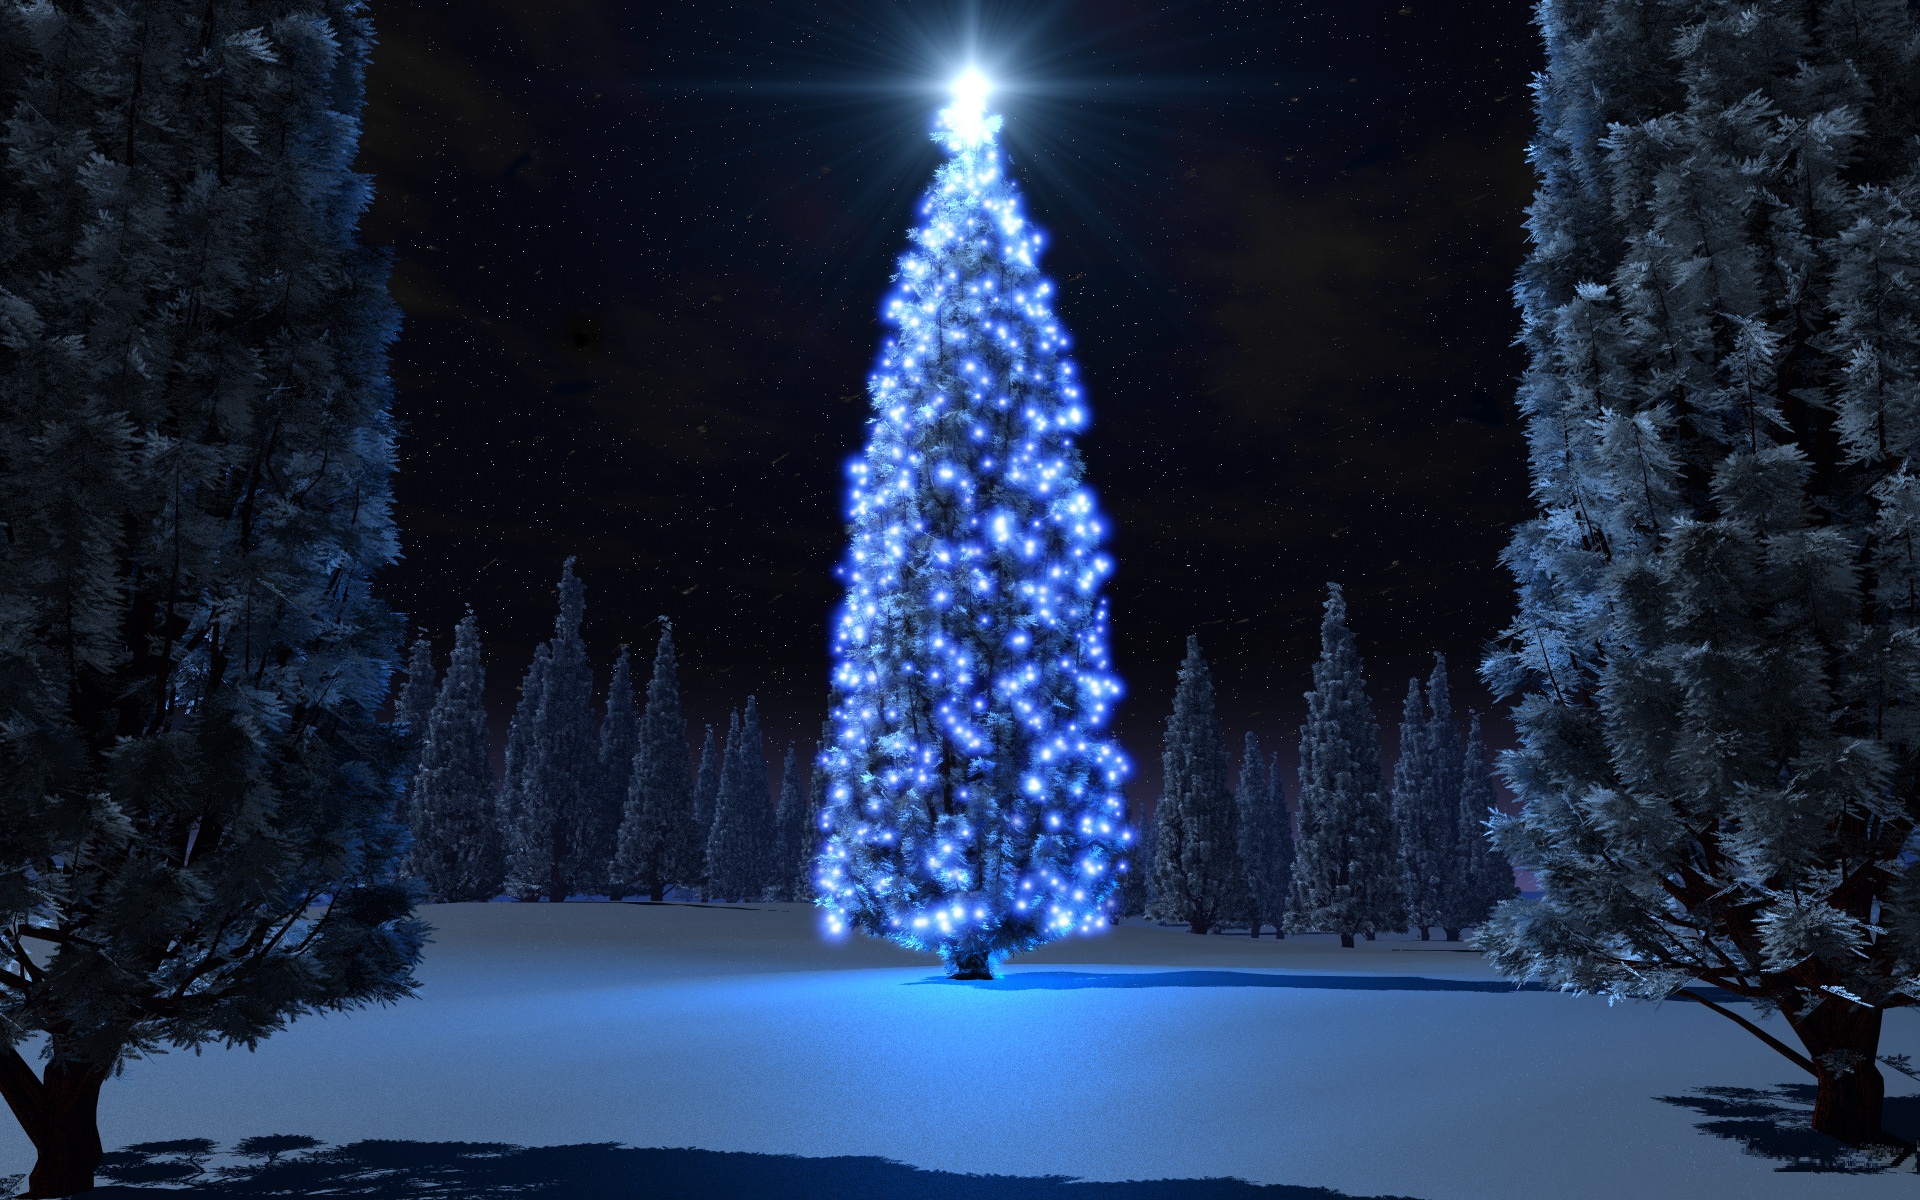 Christmas Wallpaper For Your Puter Image In